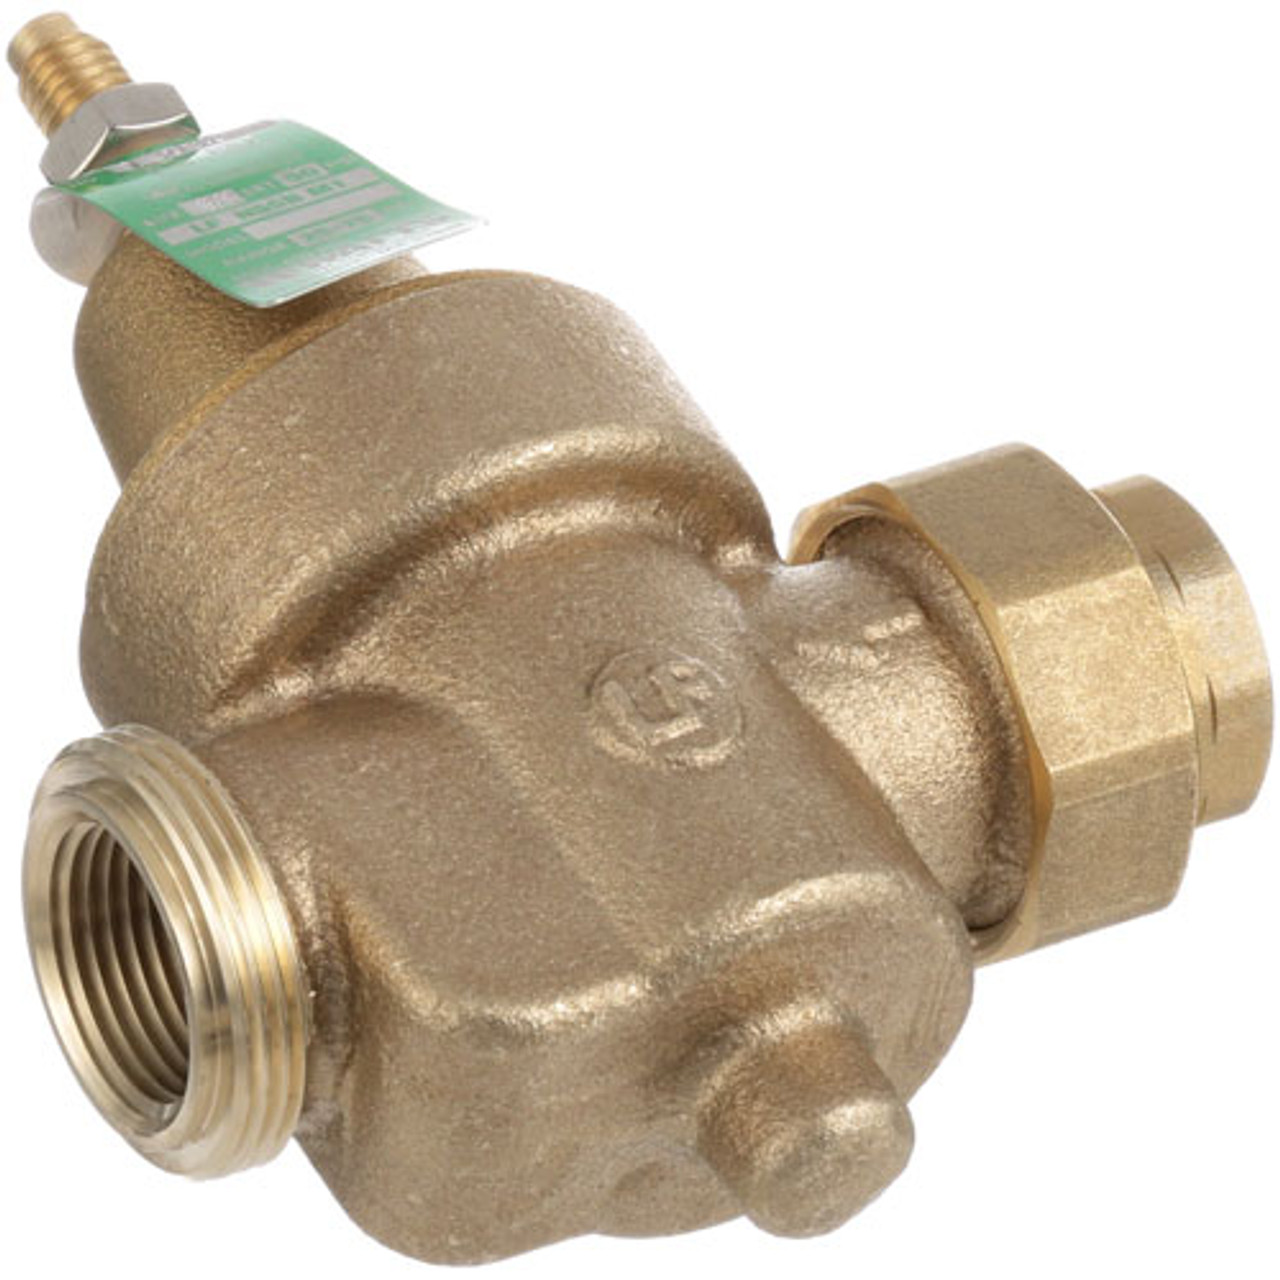 Valve, Pressure Reducing - Replacement Part For Hatco HT03.02.004